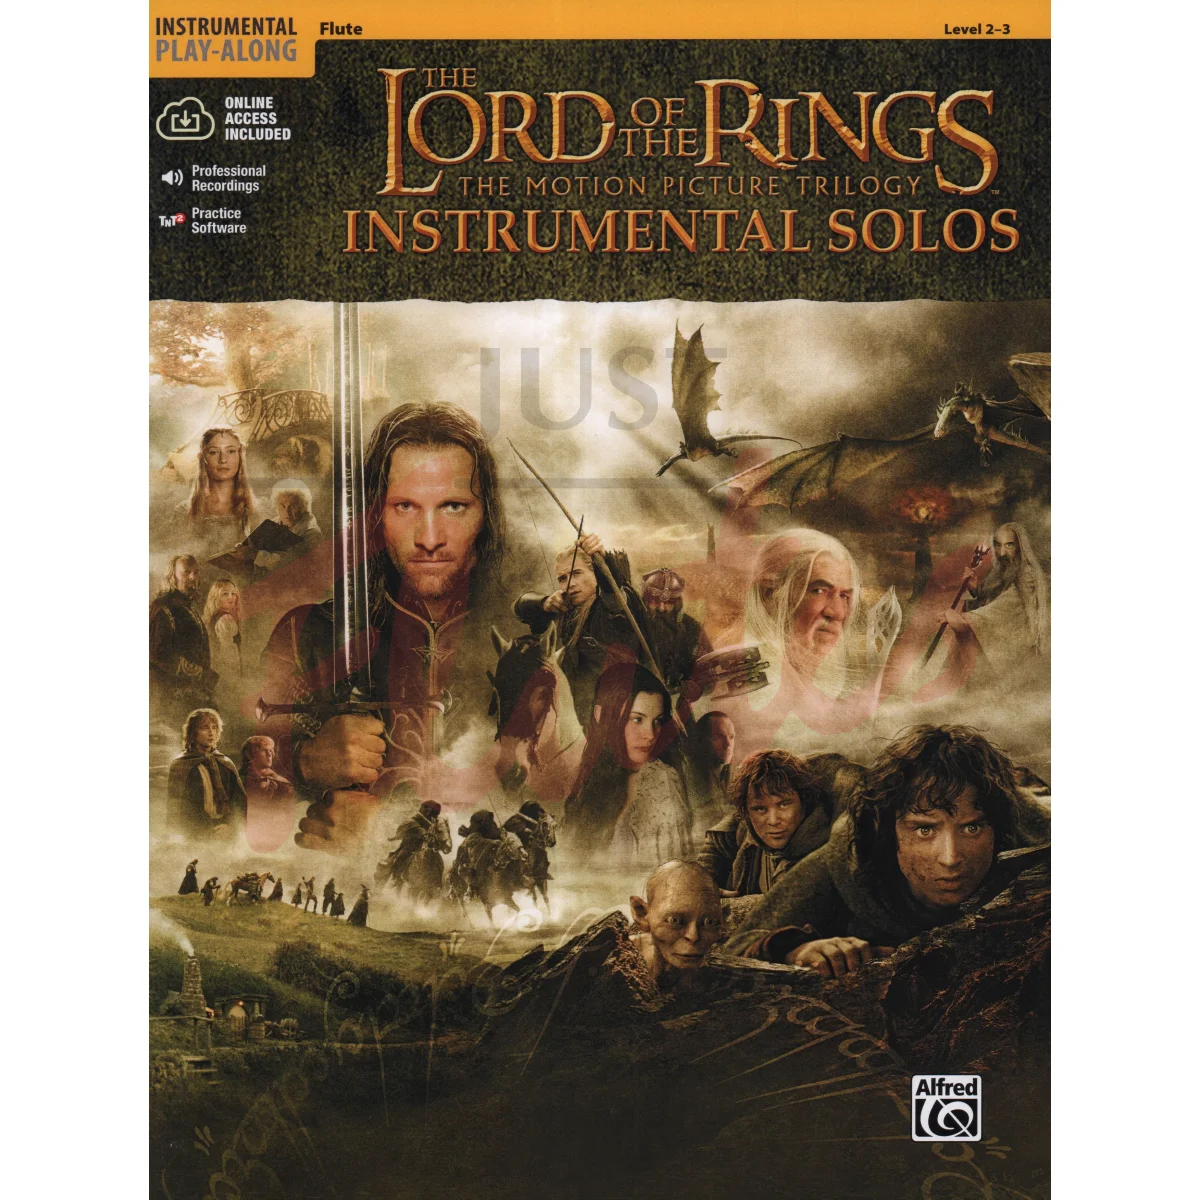 Lord of the Rings Trilogy Instrumental Solos for Flute